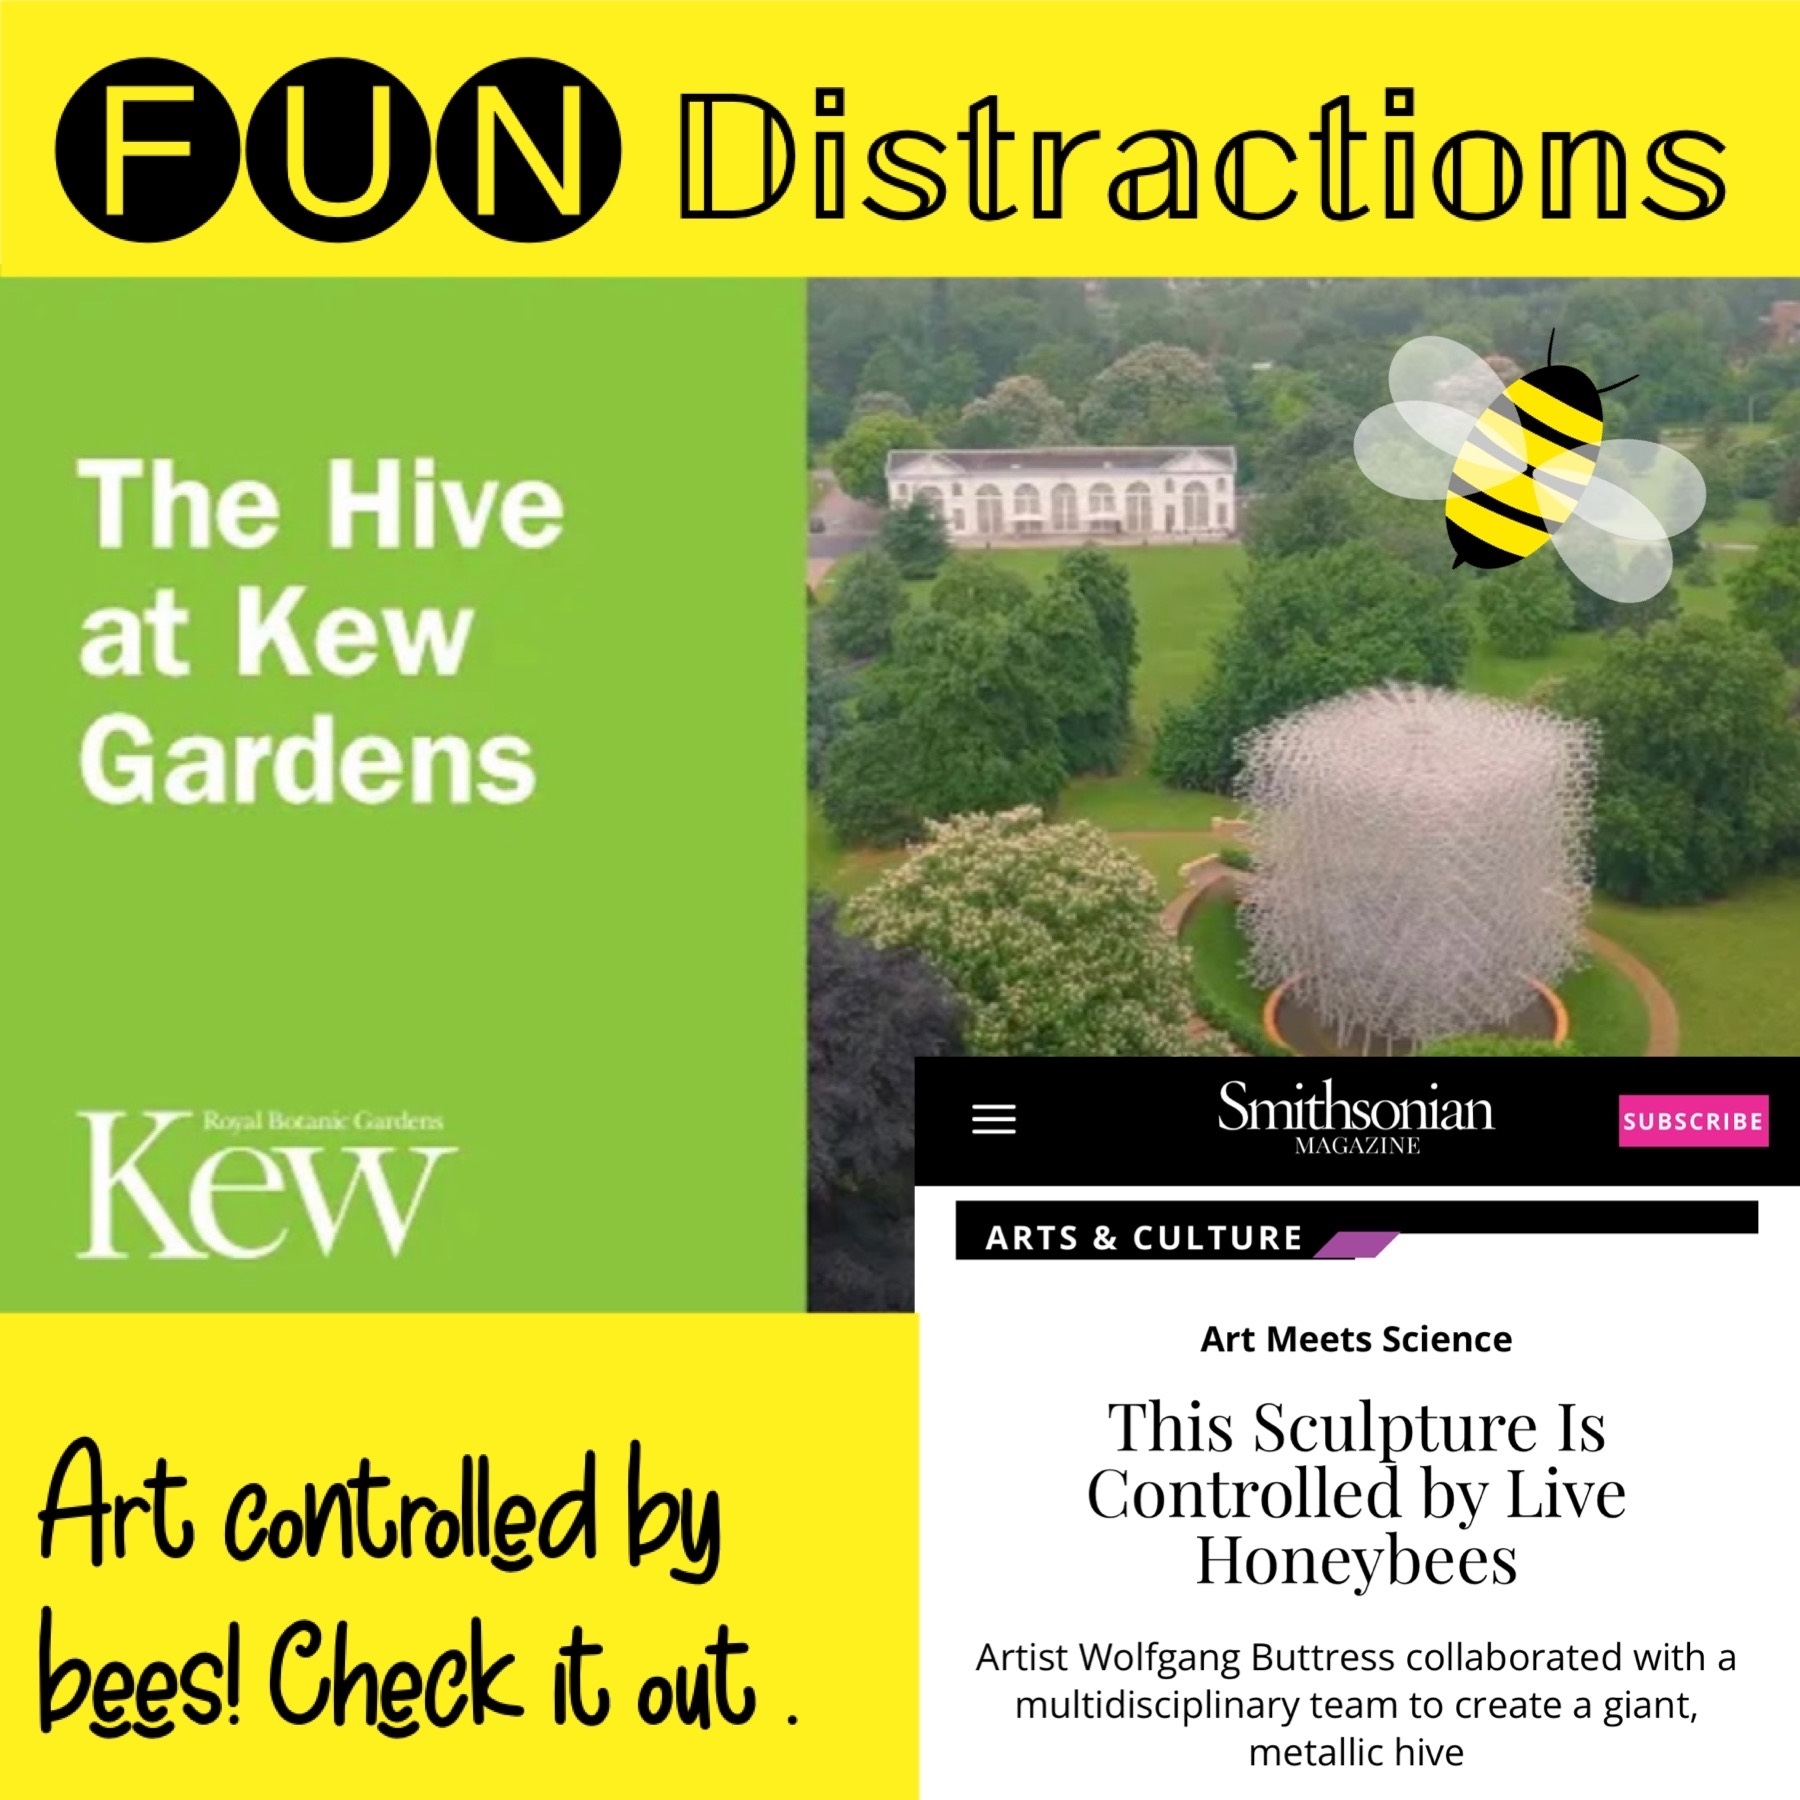 Image of the Hive sculpture at Kew Gardens